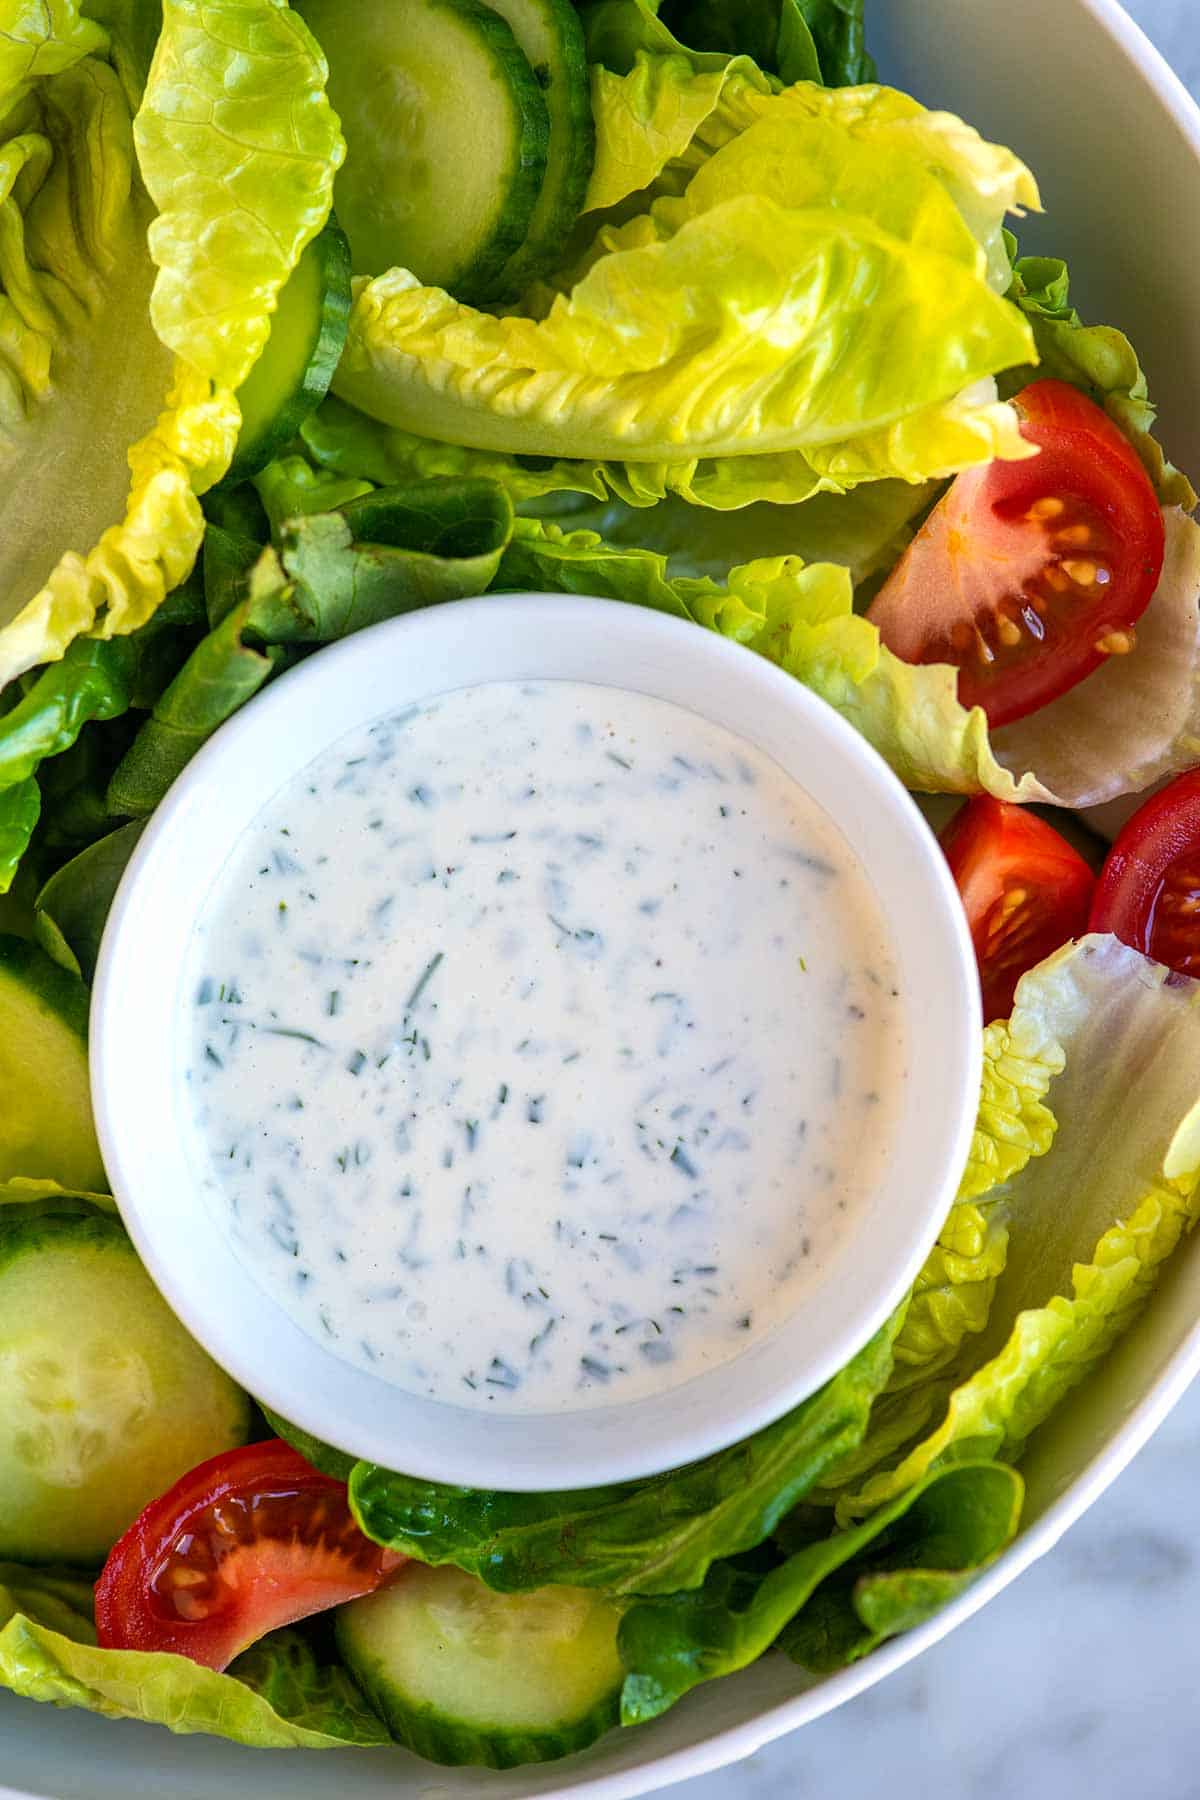 Ranch dressing made from scratch served with lettuce, tomatoes and cucumber